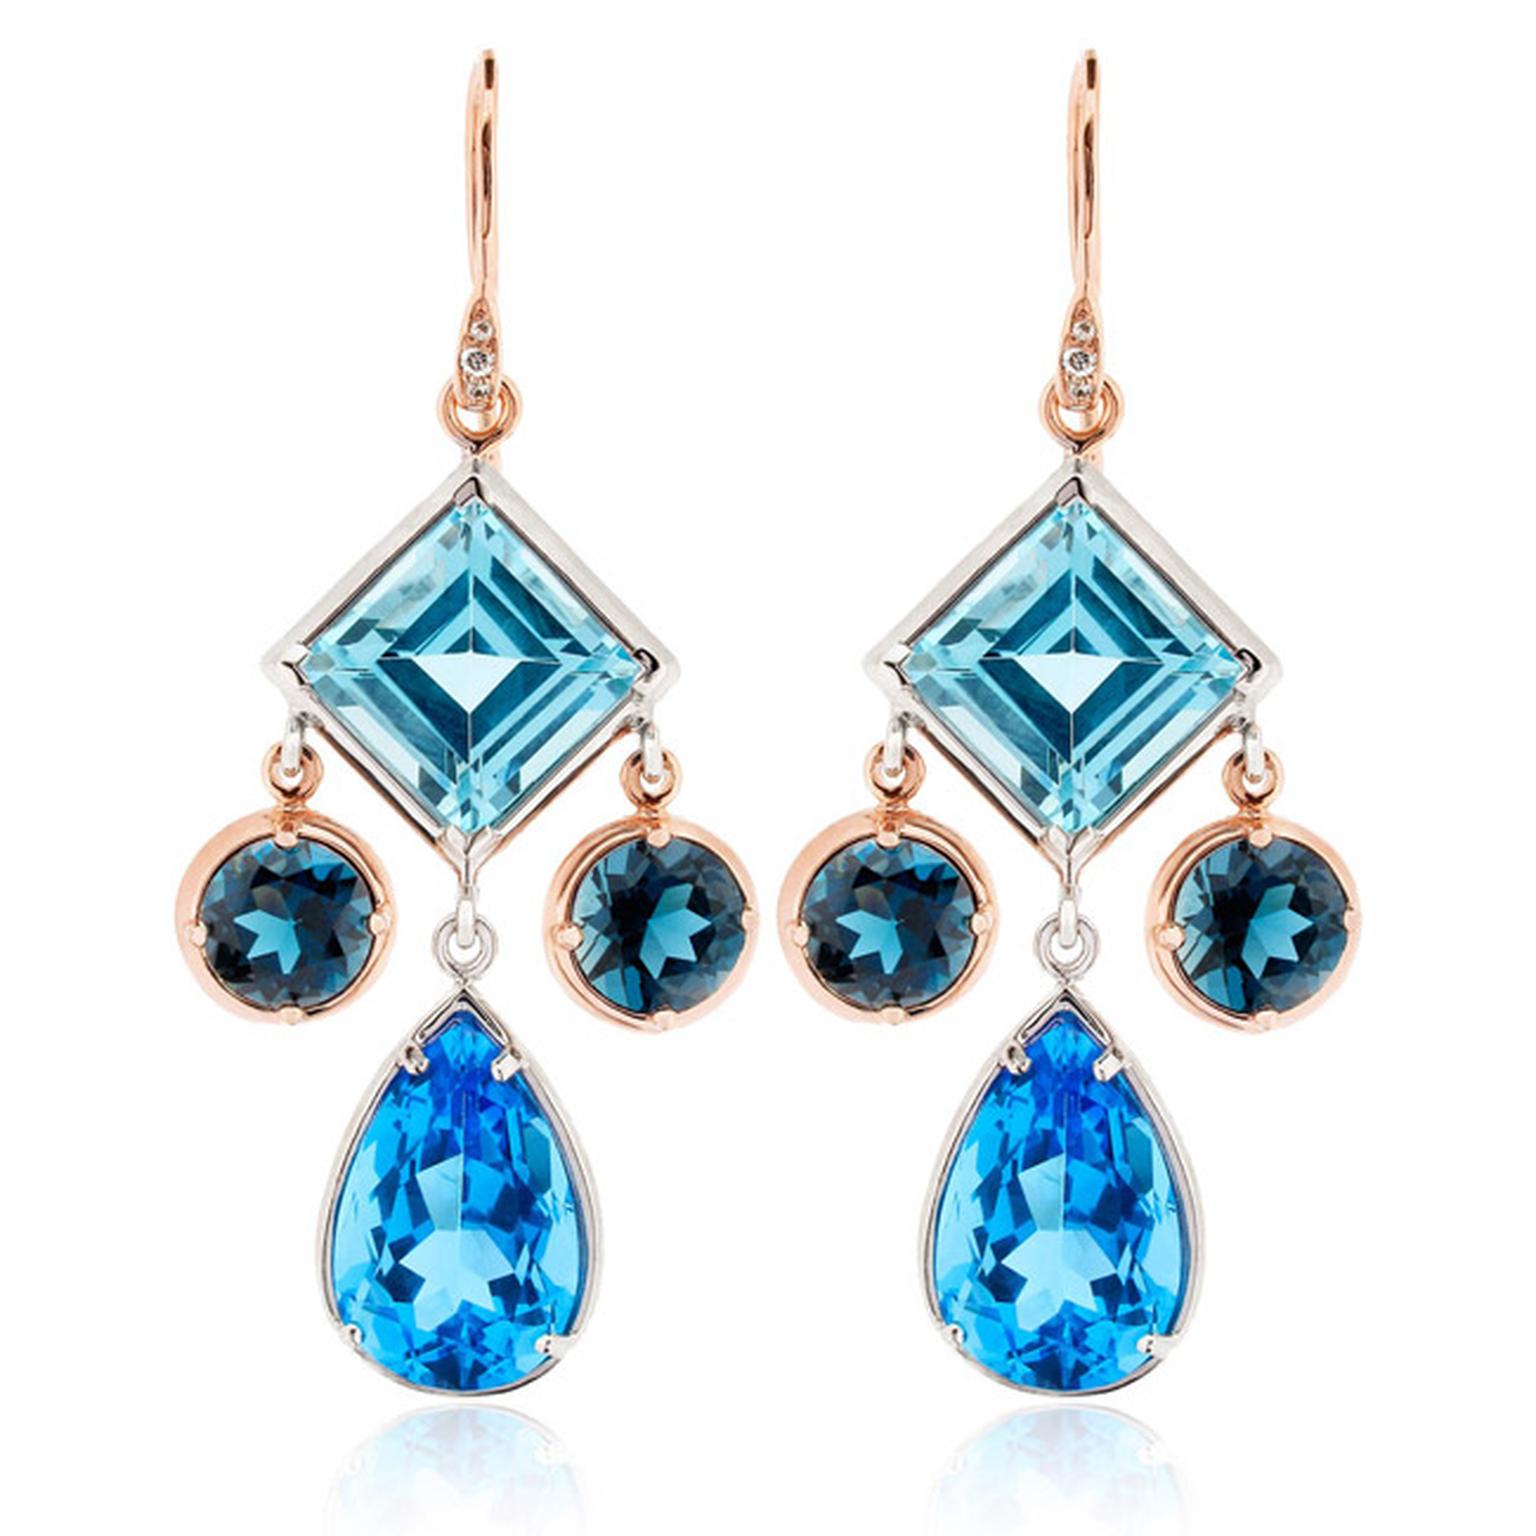 Dinny Hall Amelie Anniversary earrings featuring Ostro, London and Swiss blue topaz with sterling silver and rose gold. The mini chandelier earrings, with the three blue hues and three different gemstone cuts, showcase Dinny Hall's signature bohemian styl